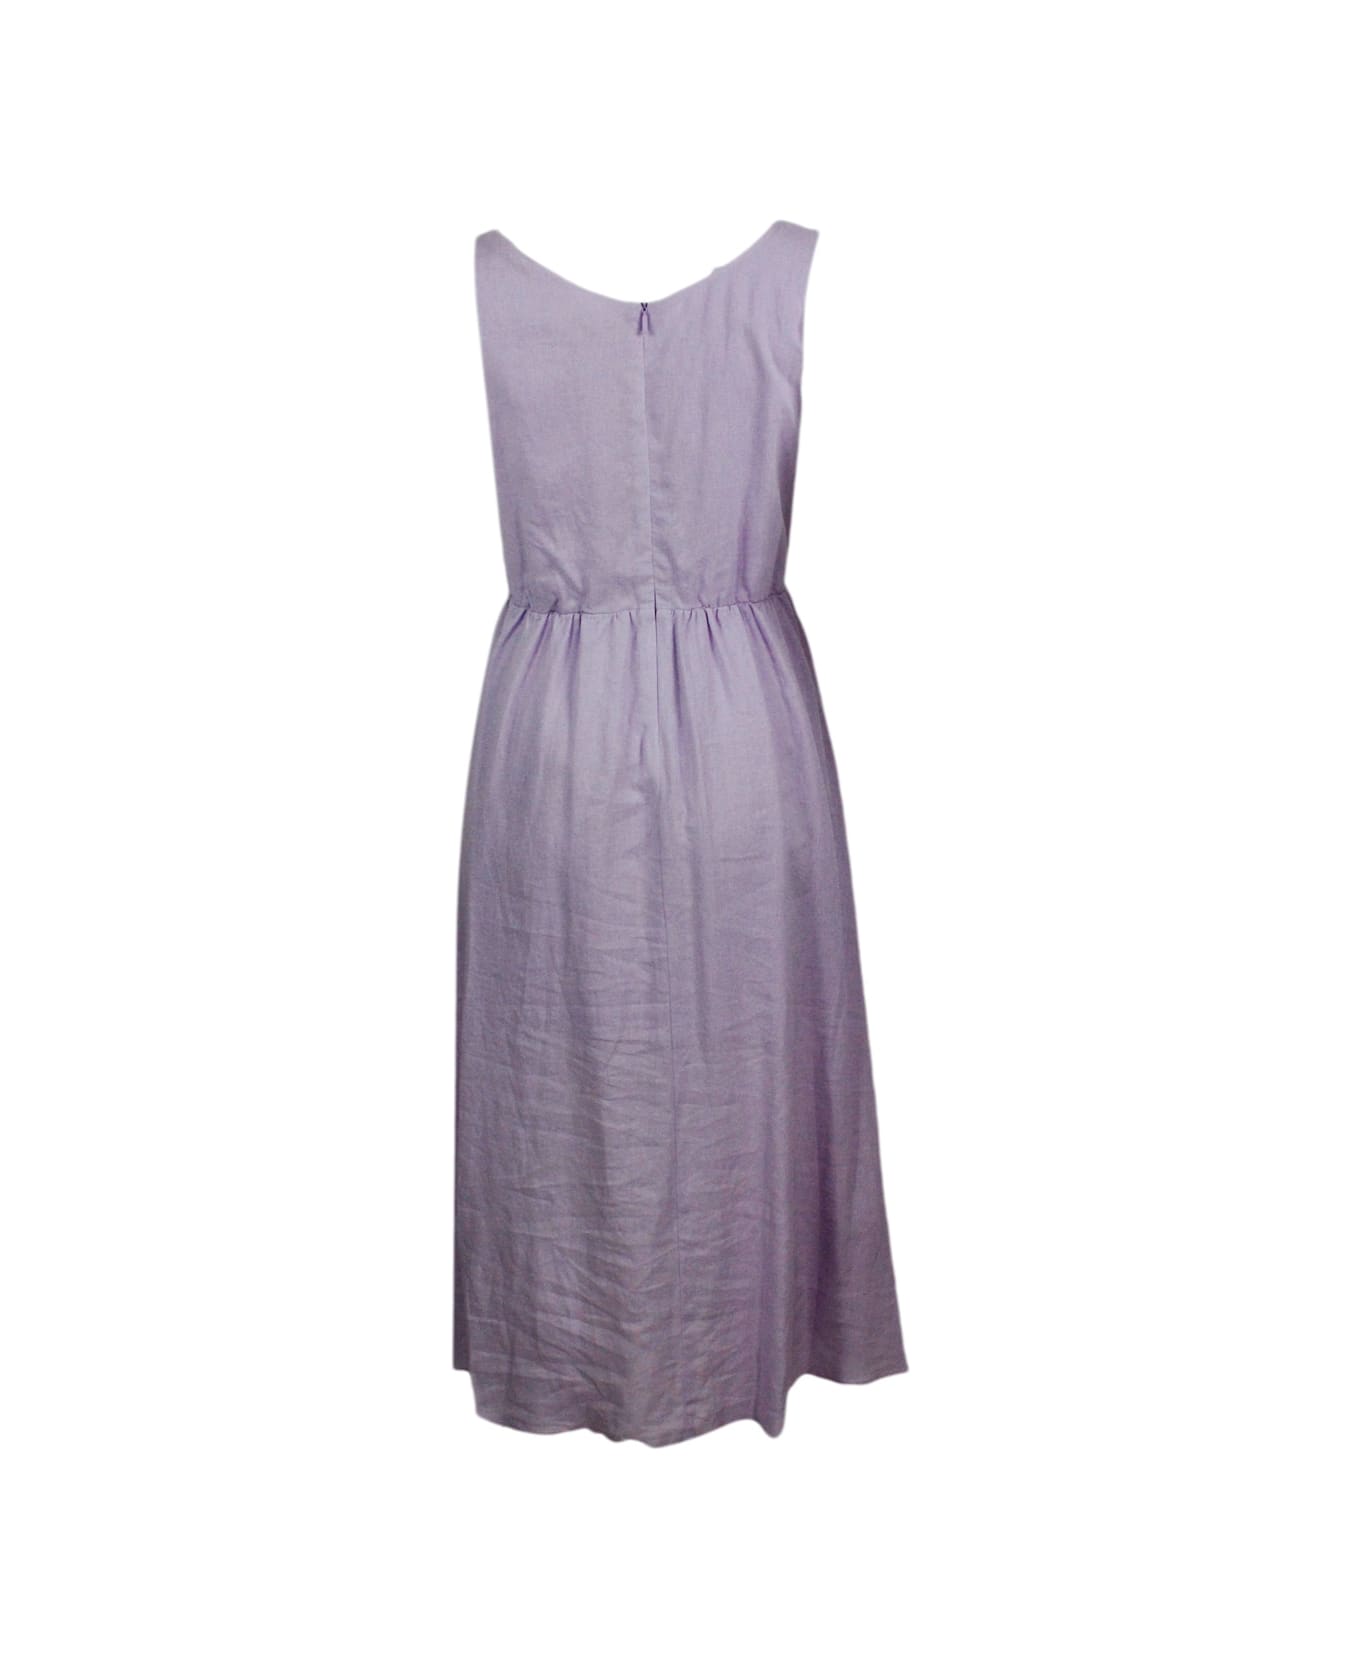 Armani Collezioni Sleeveless GARNITUR Made Of Linen Blend With Elastic Gathering At The Waist. Welt Pockets - Pink